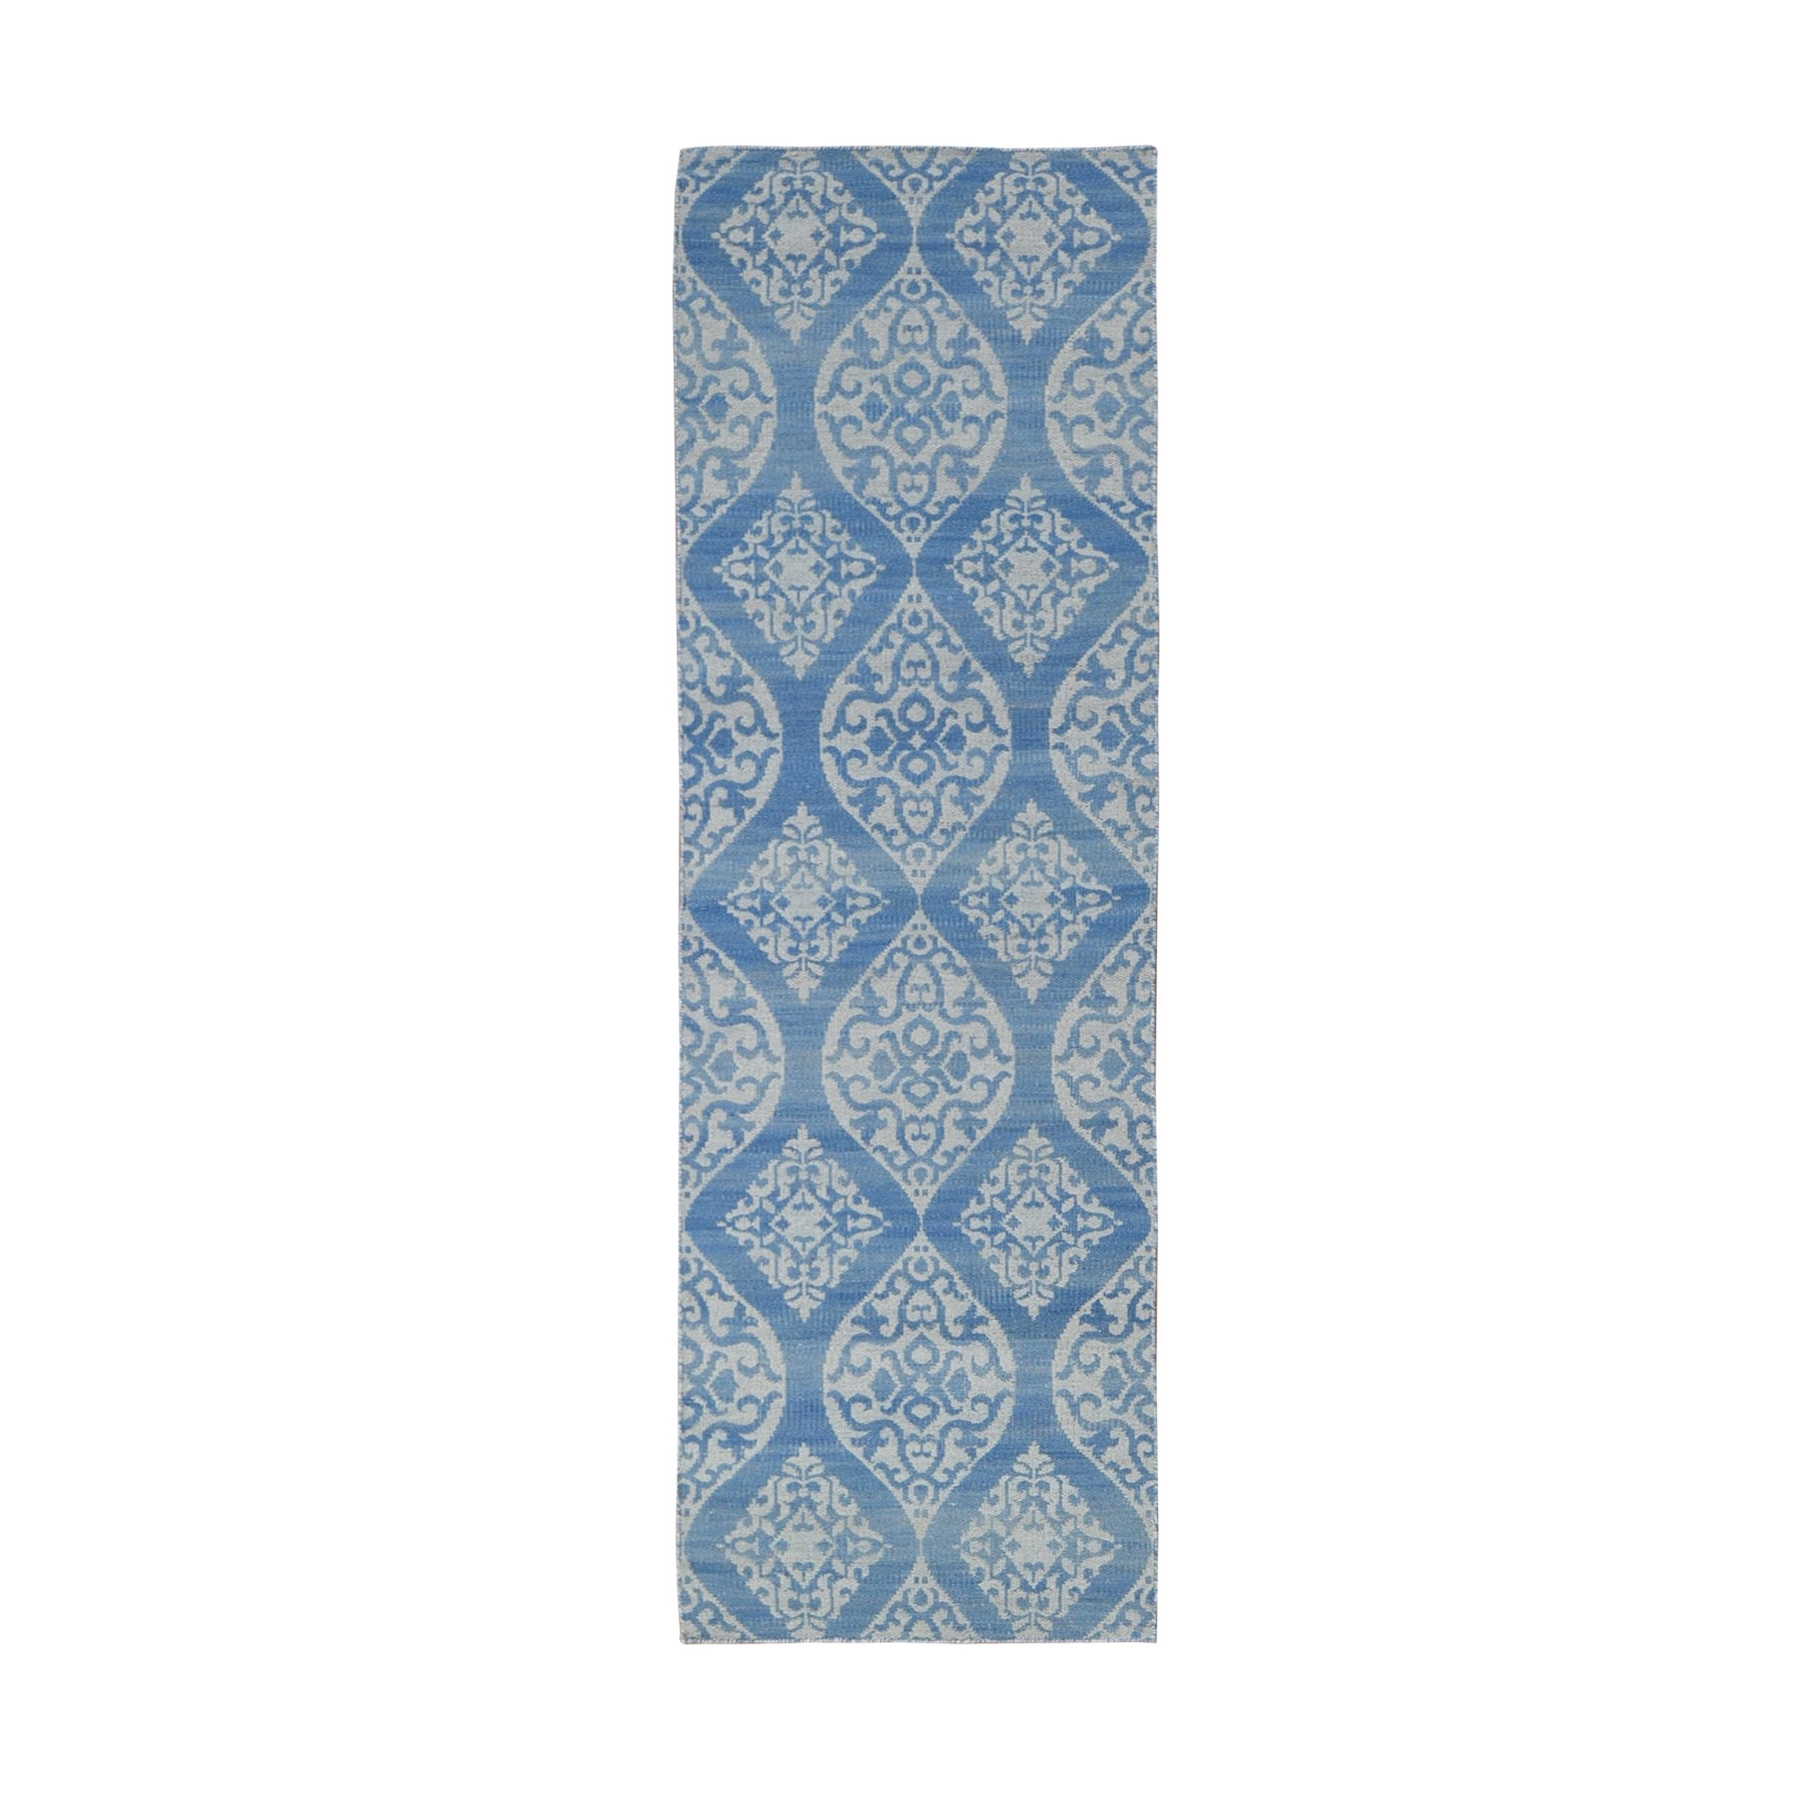 Fine Kilim Collection Hand Woven Blue Rug No: 1132198